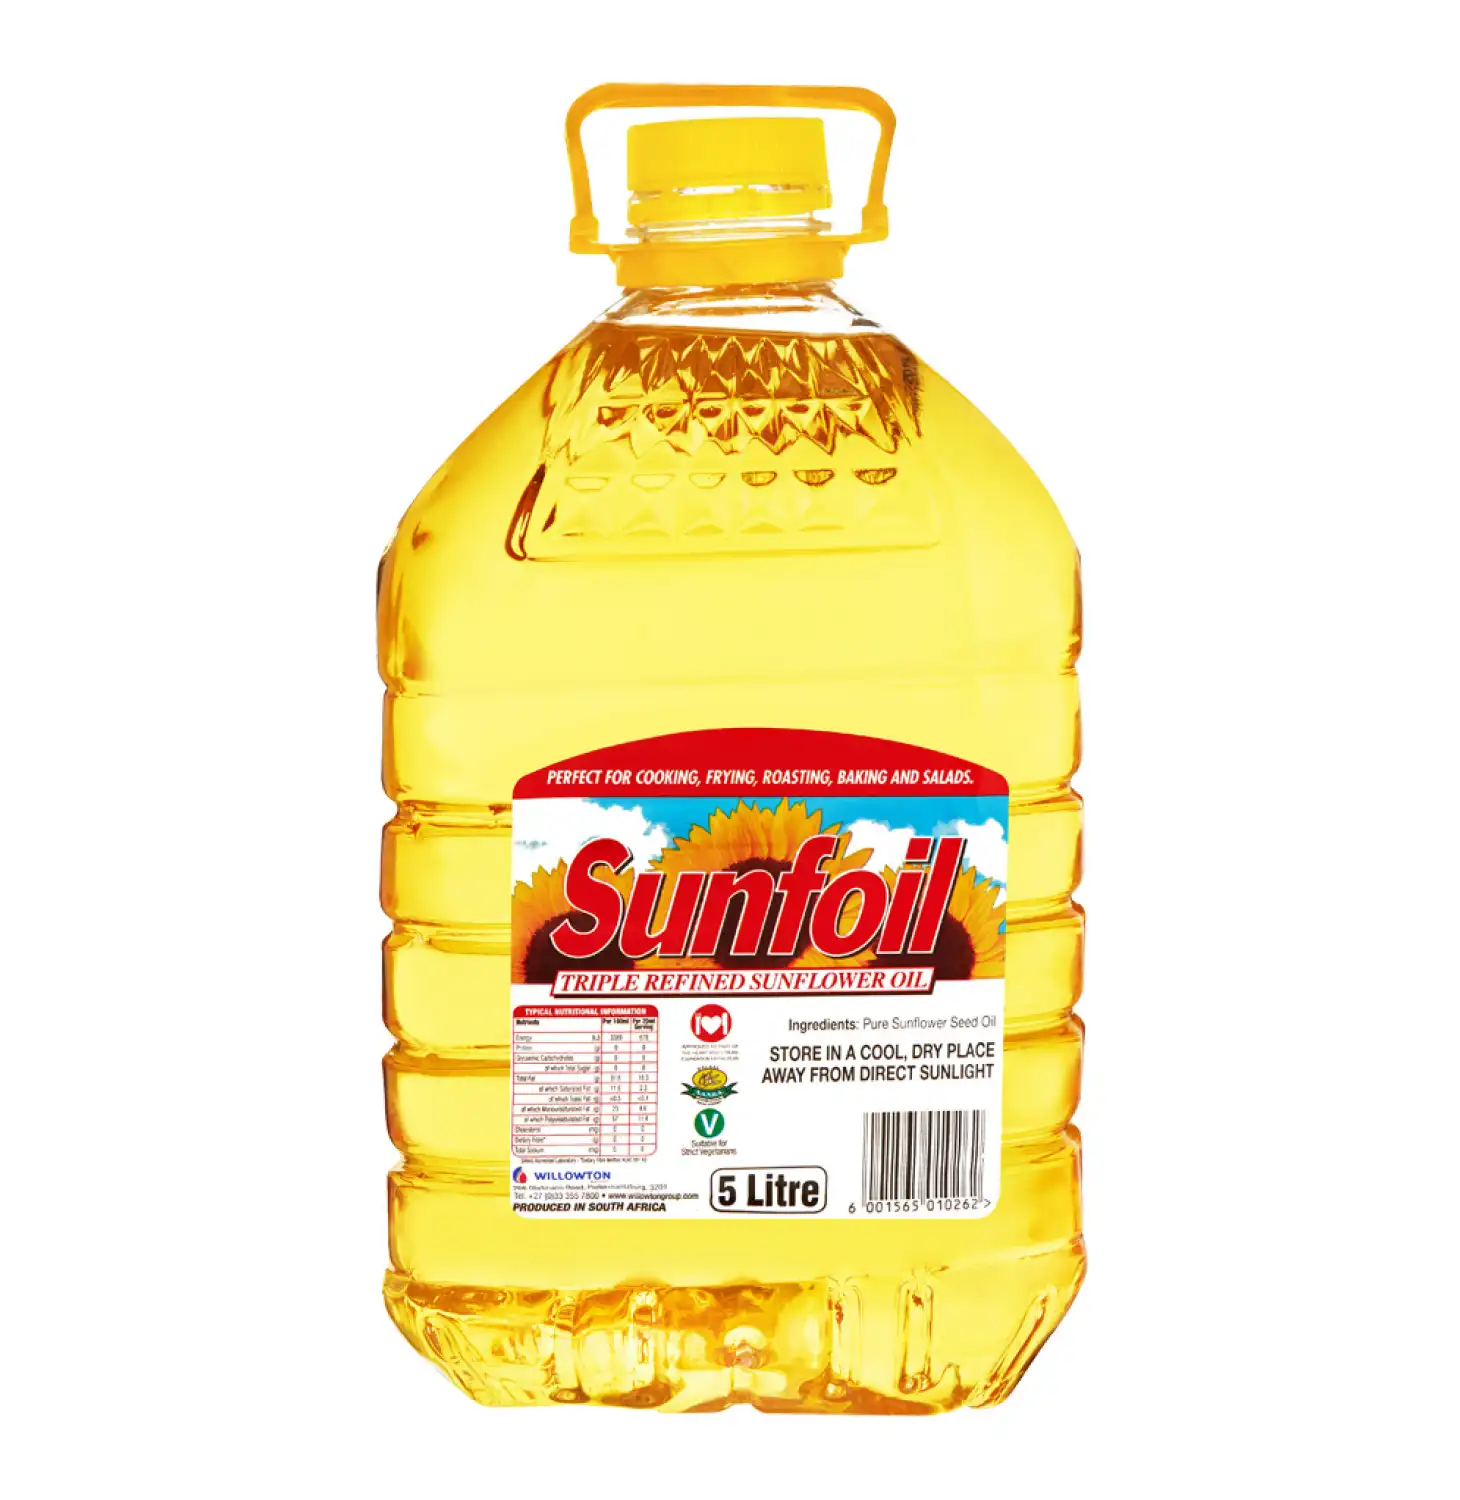 Factory Price Refined Sunflower oil /ISO/HALAL/HACCP Approved & Certified